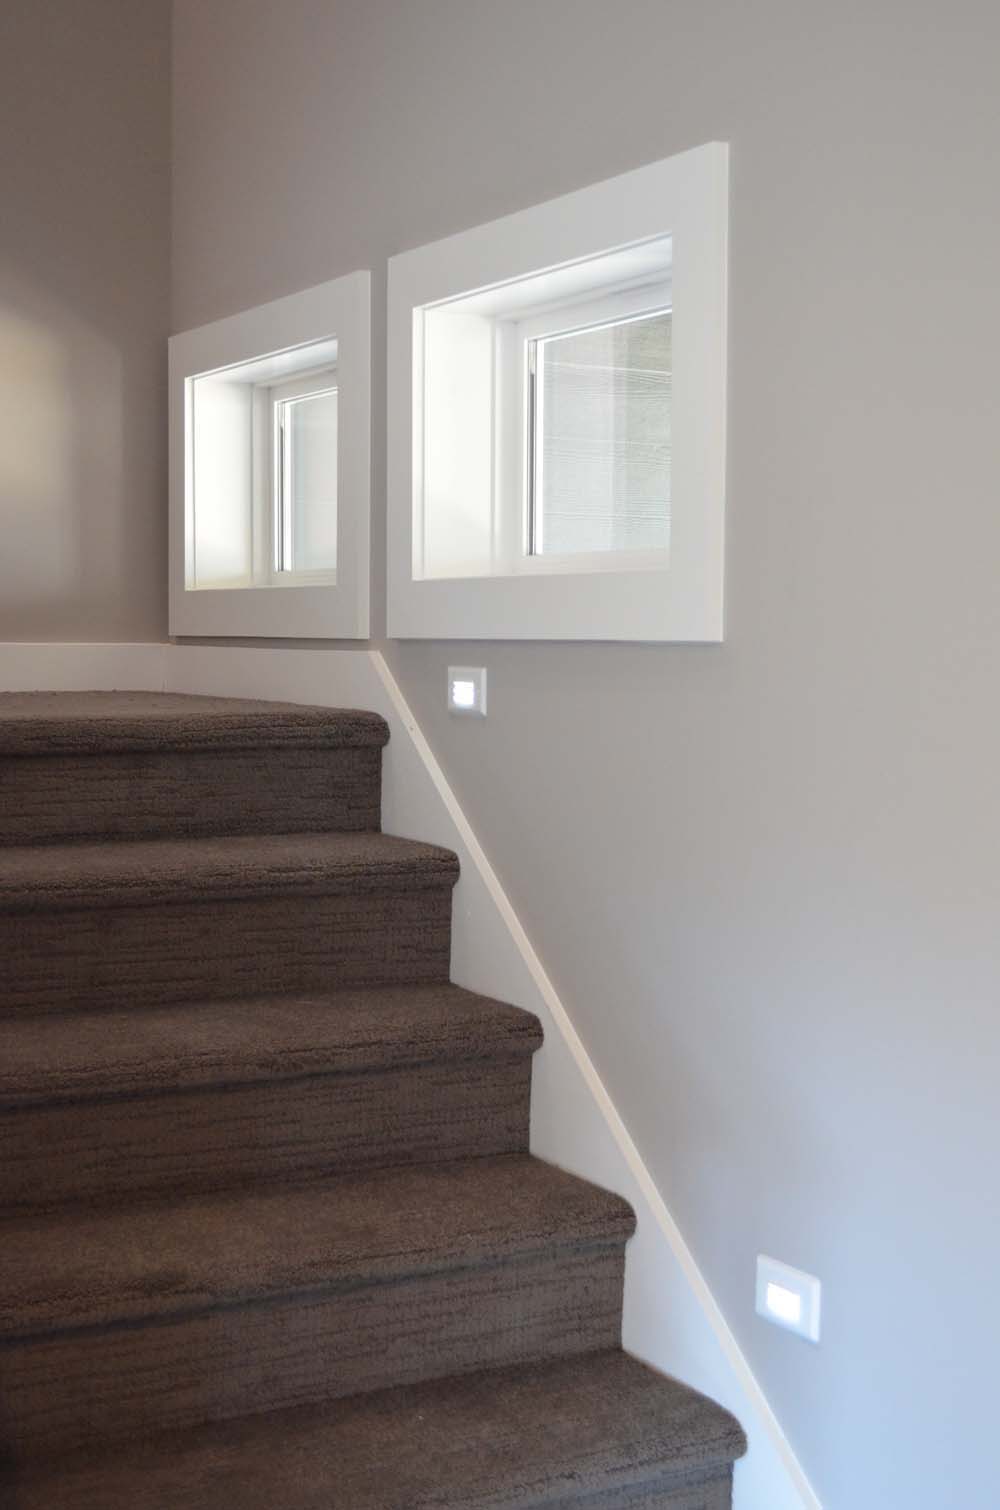 small windows on landing of stairs.